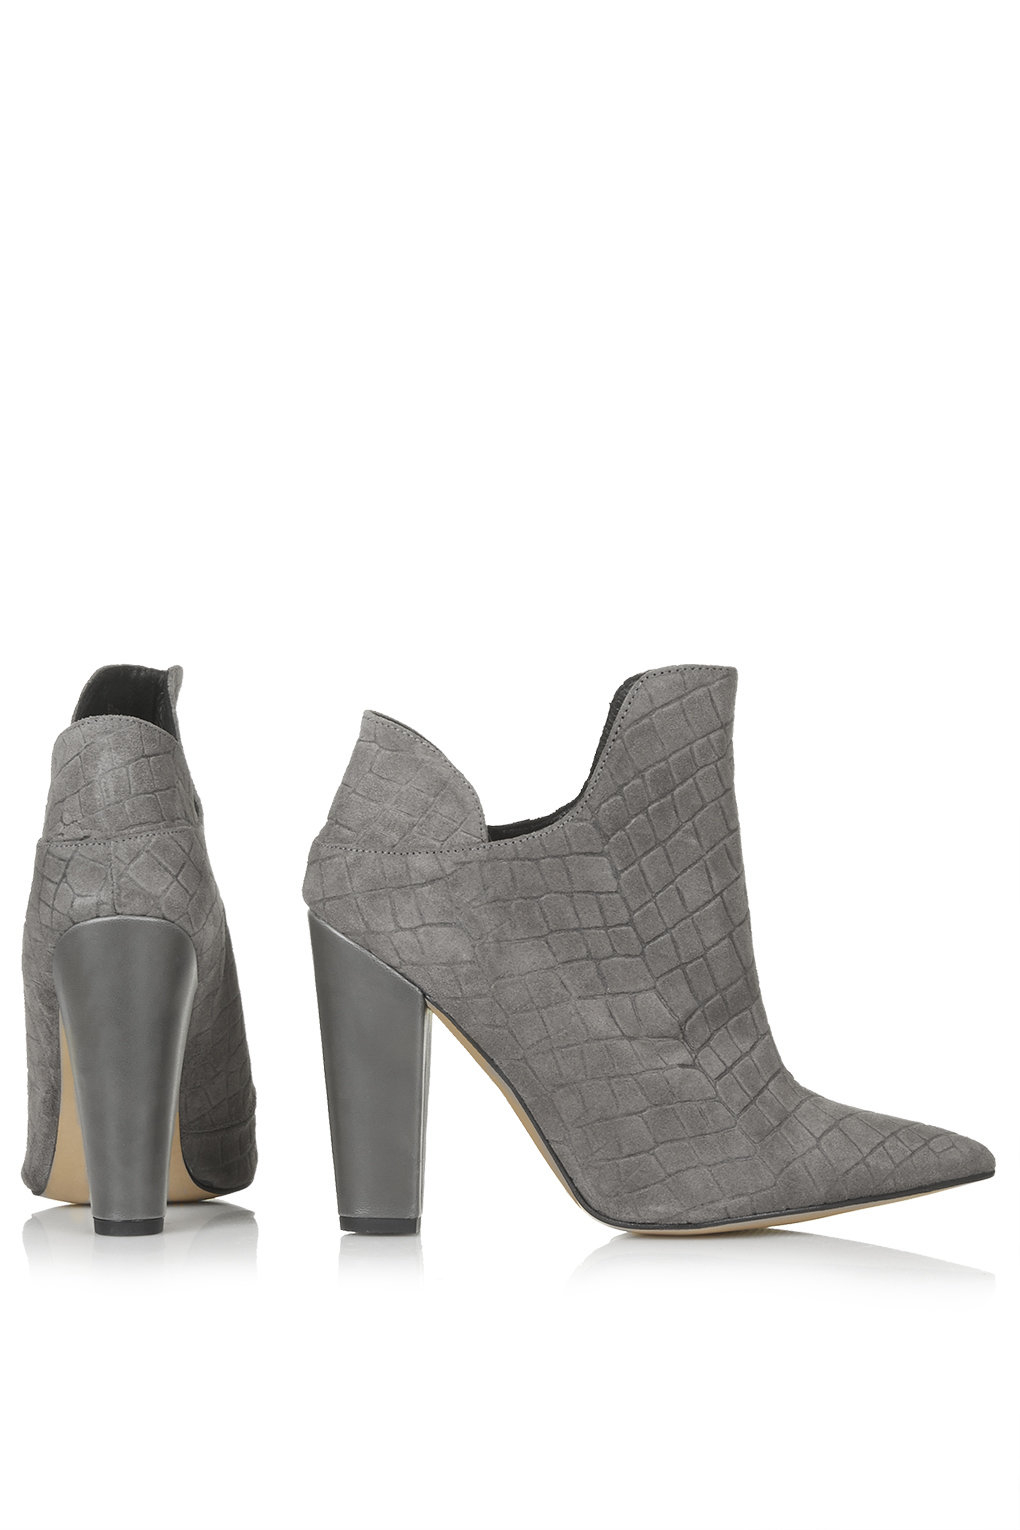 topshop grey ankle boots